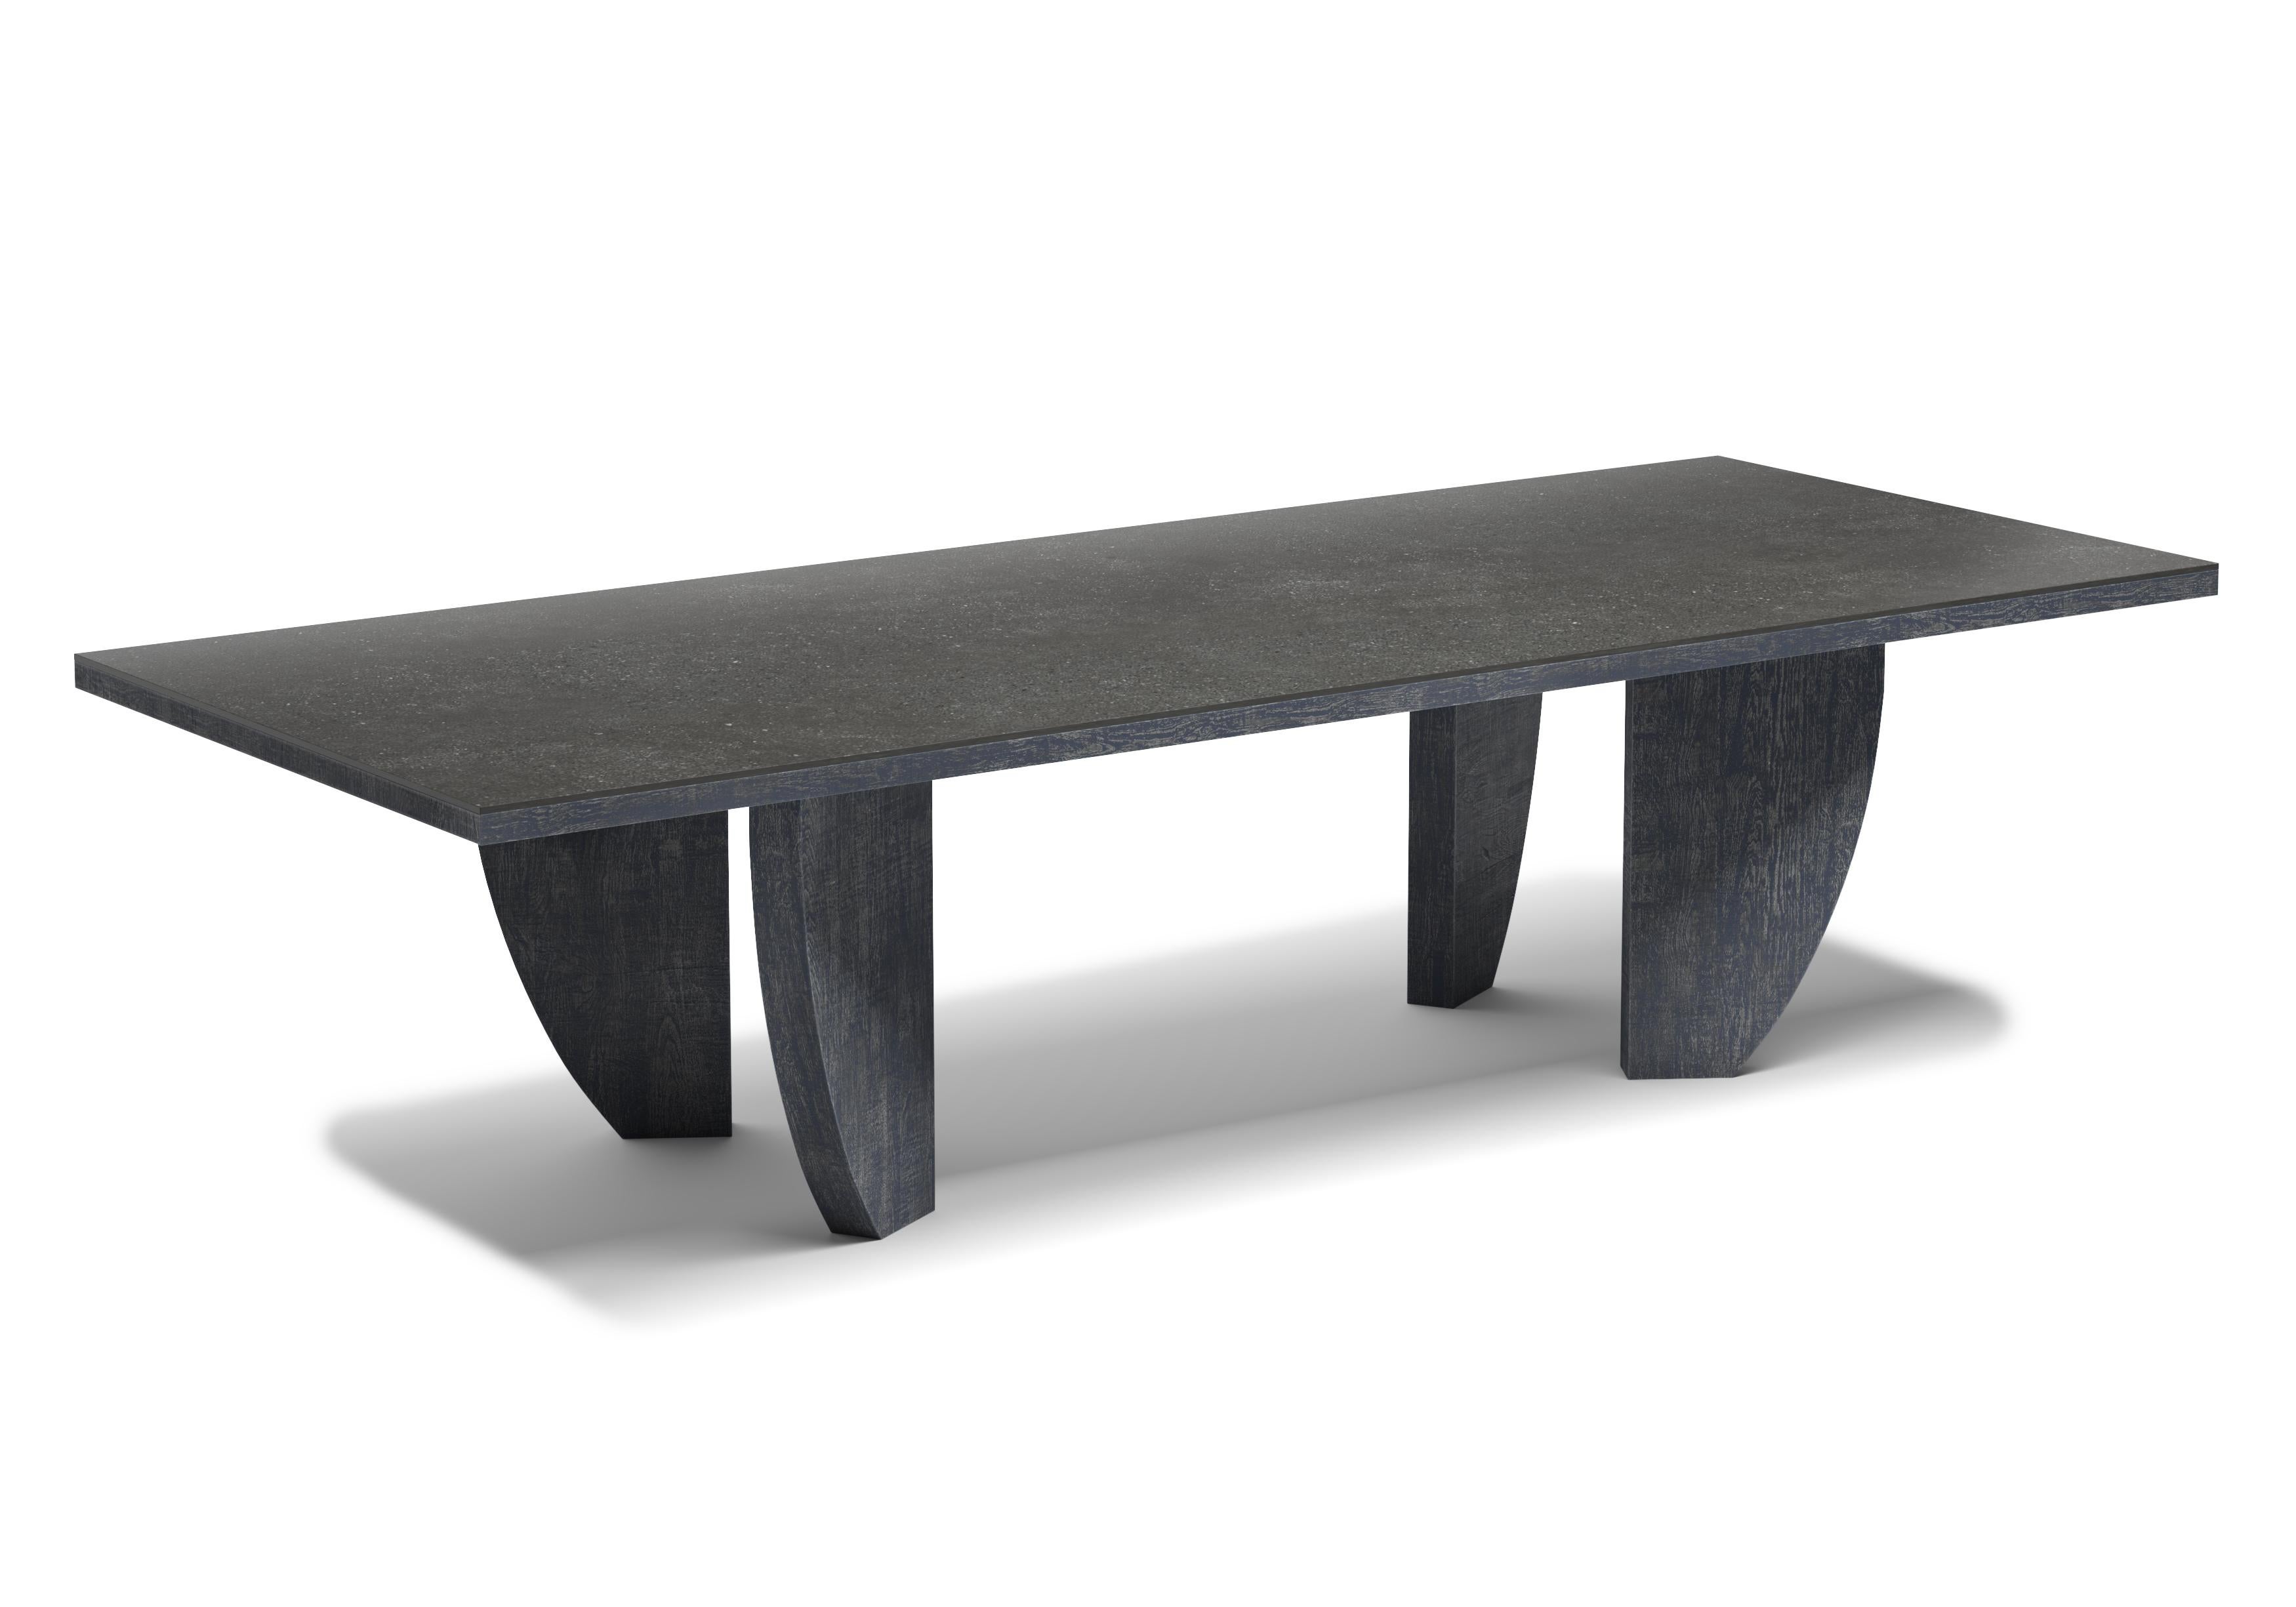 Ralph-noche Outdoor Dining Table by Snoc In New Condition For Sale In Yukarıdudullu, 34